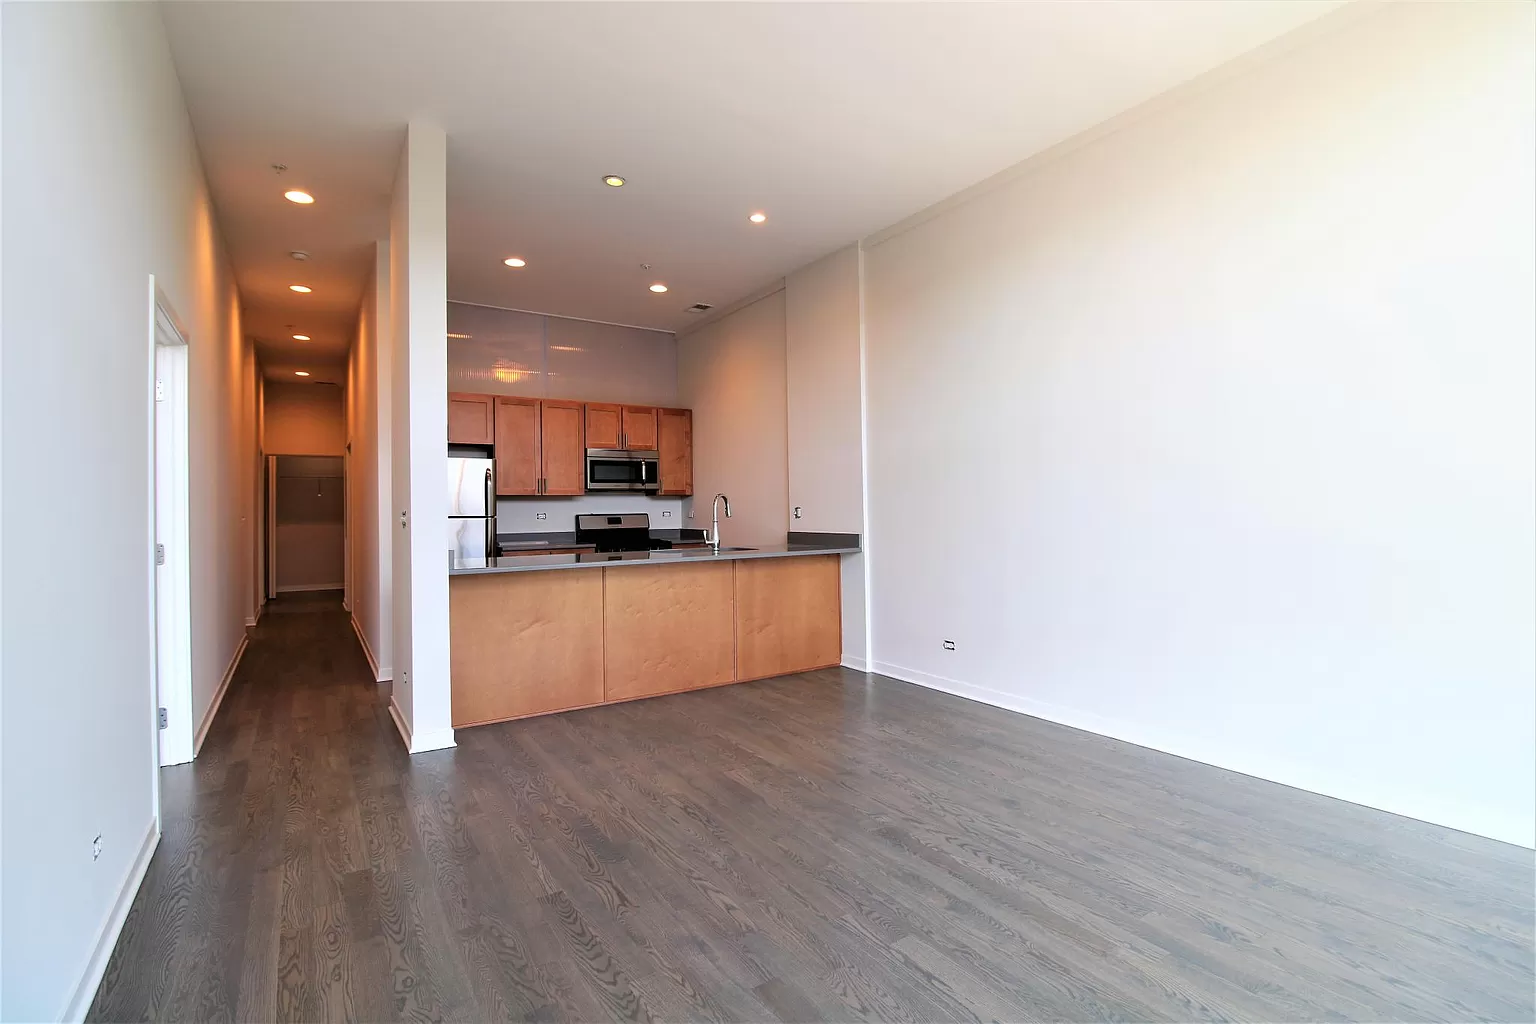 East-West Housing 2.5 Bed 2 bath apartment - Available for lease takeover or looking for a room mate for East-West University Students in Chicago, IL